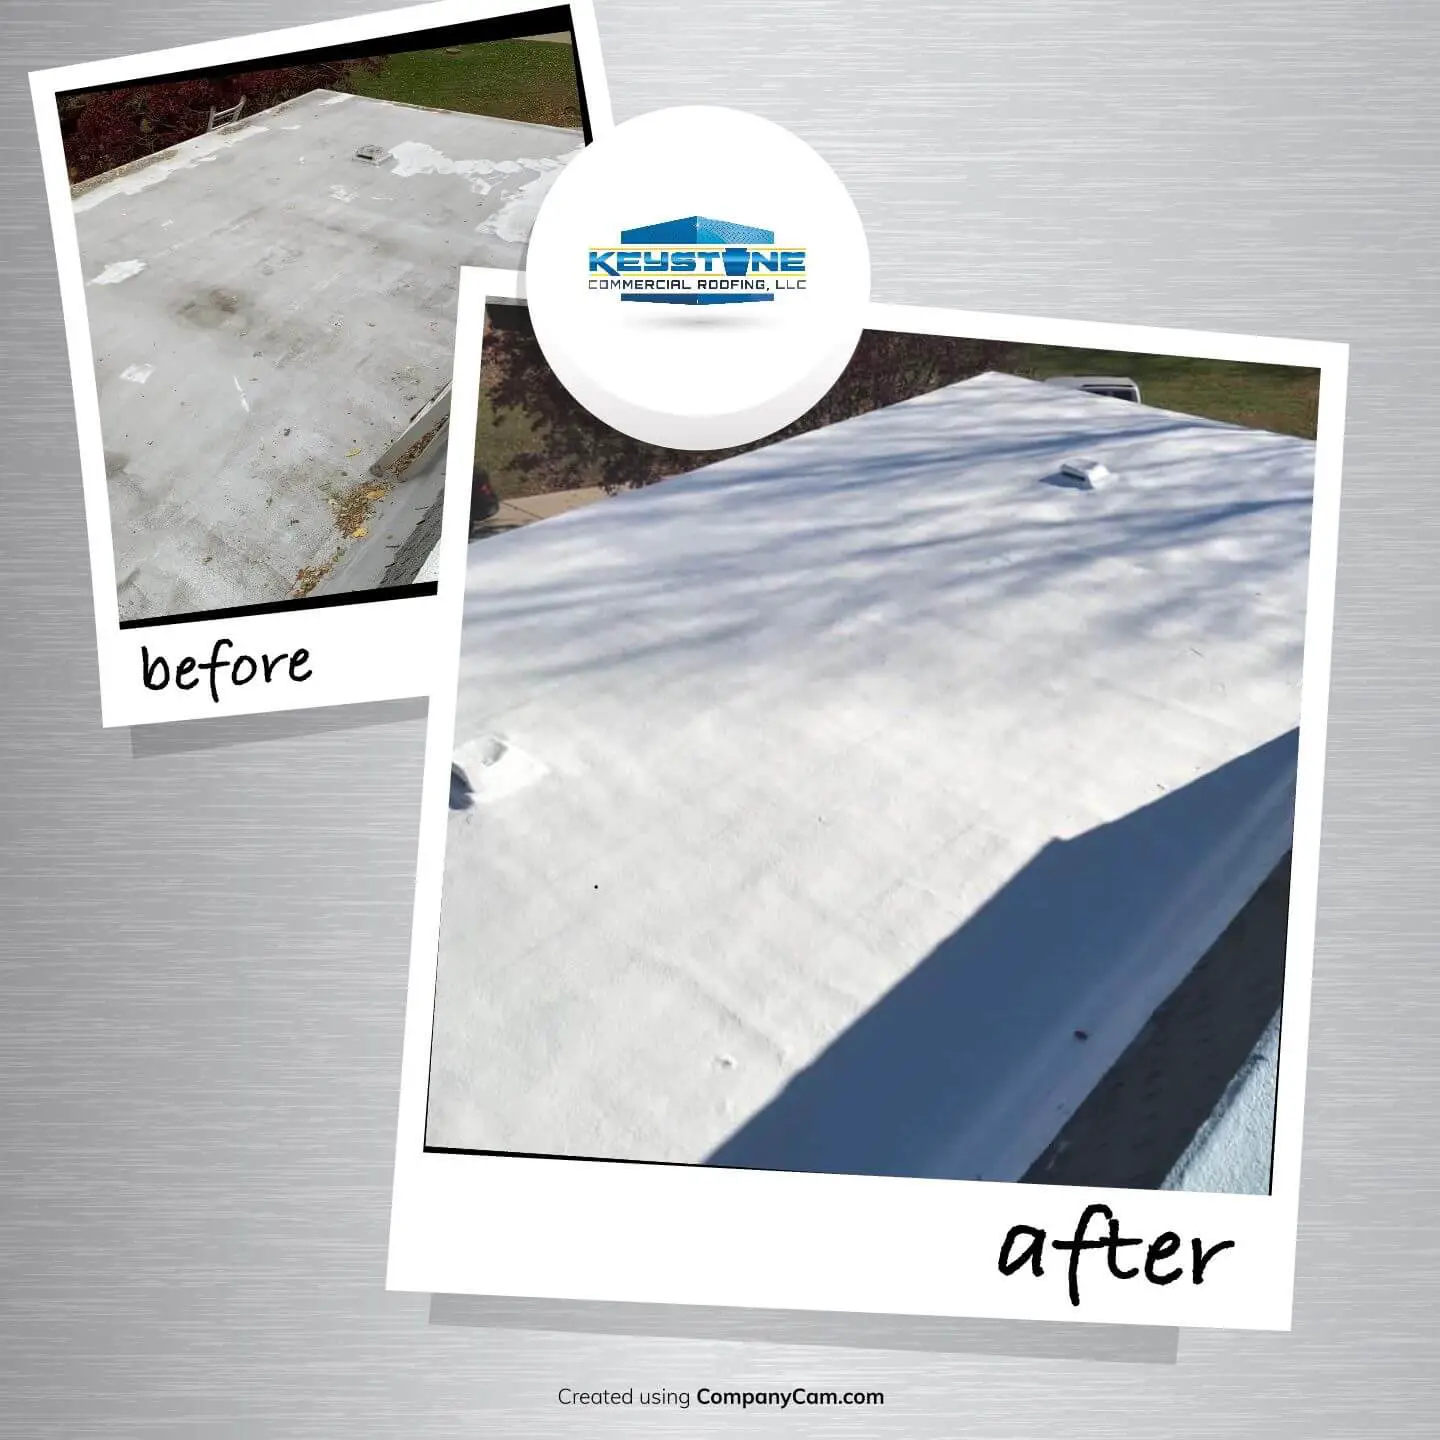 Will Elastomeric Roof Coating Stop Leaks? Help for Facility Owners